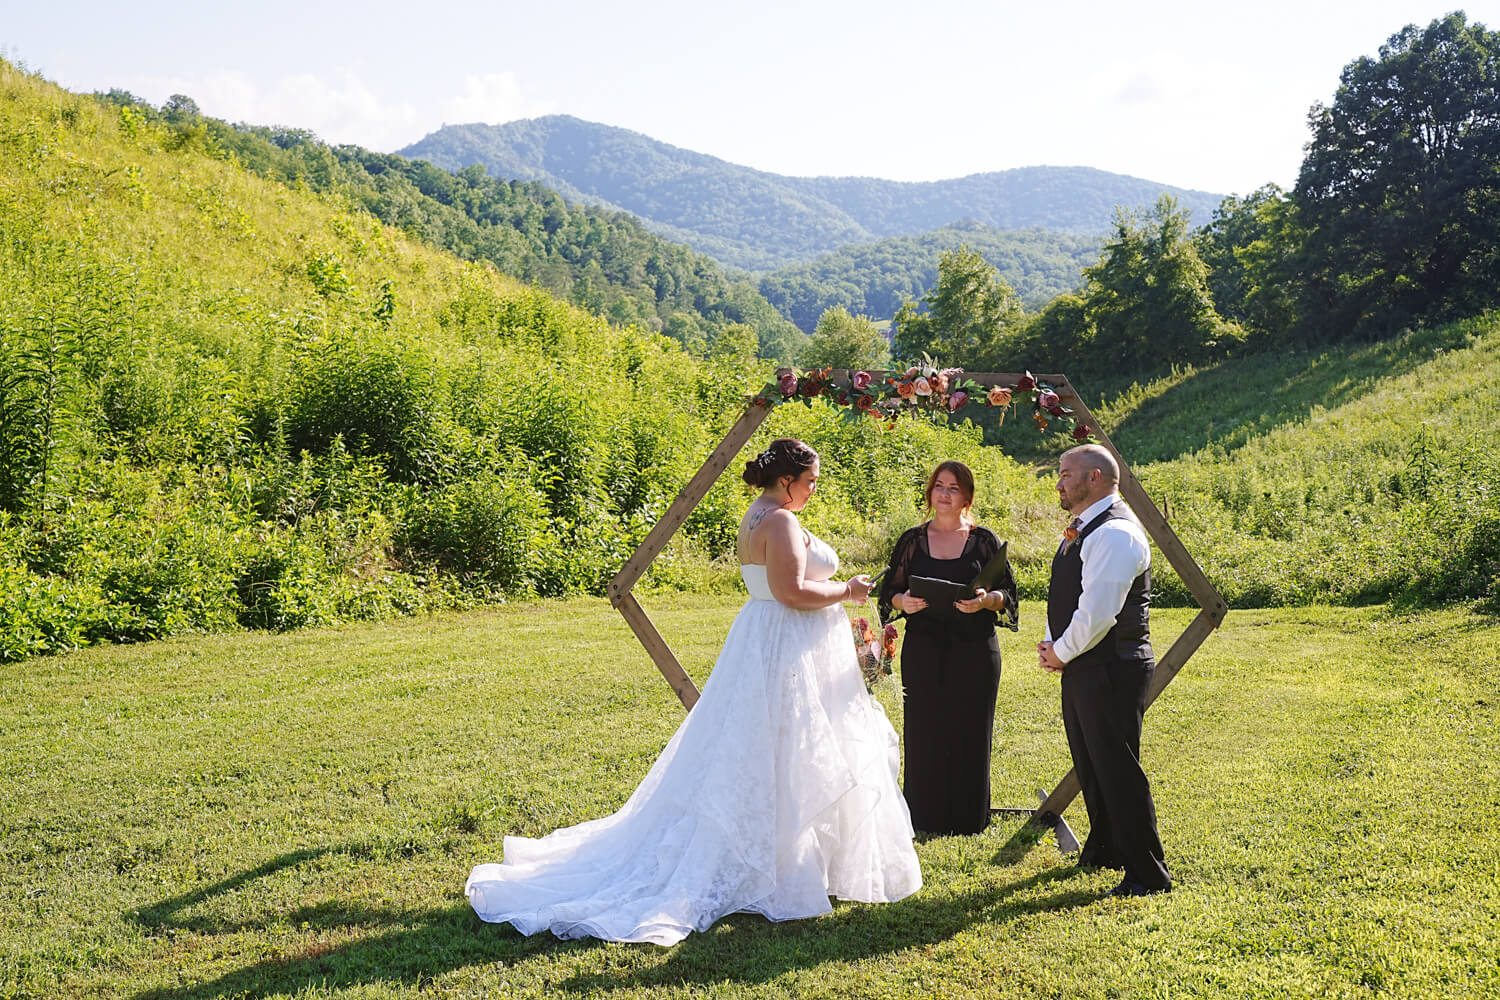 Wedding ceremony at a mountain view in a field with a hexagon arbor